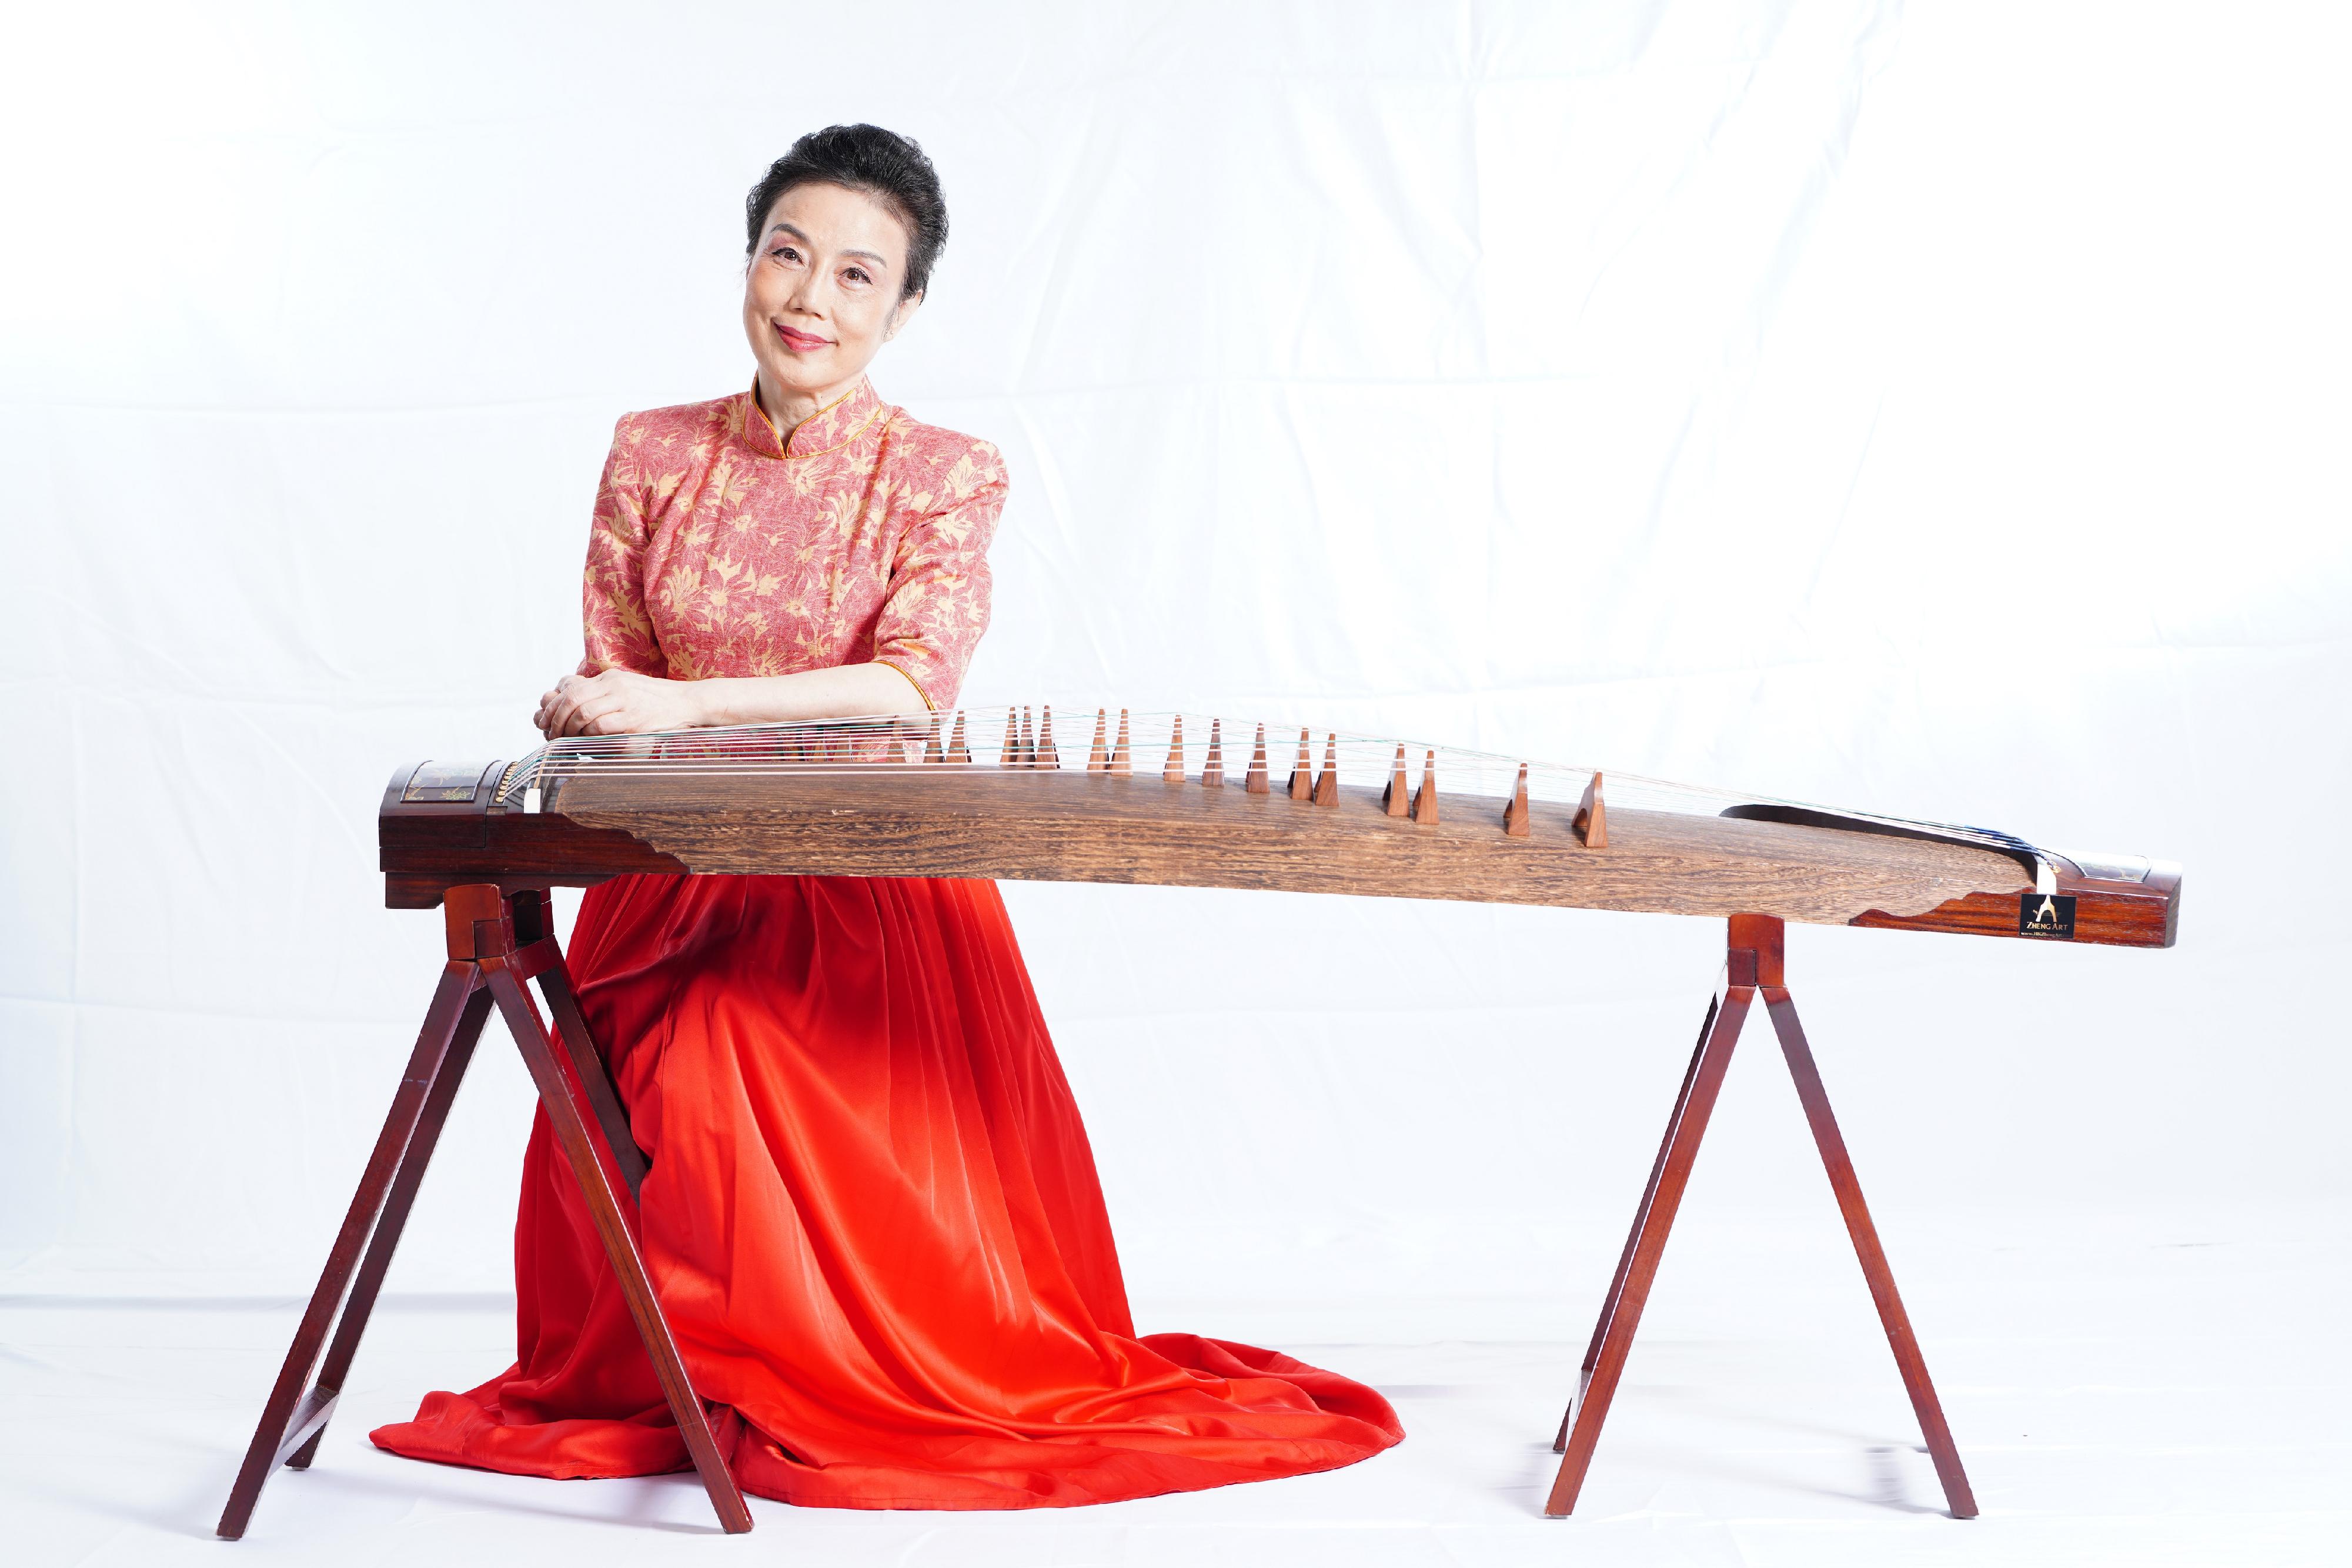 The Leisure and Cultural Services Department will present a number of recitals under the "Our Music Talents" Series and the "City Hall Virtuosi" Series from late September to January next year. Photo shows guzheng virtuoso Xu Lingzi.